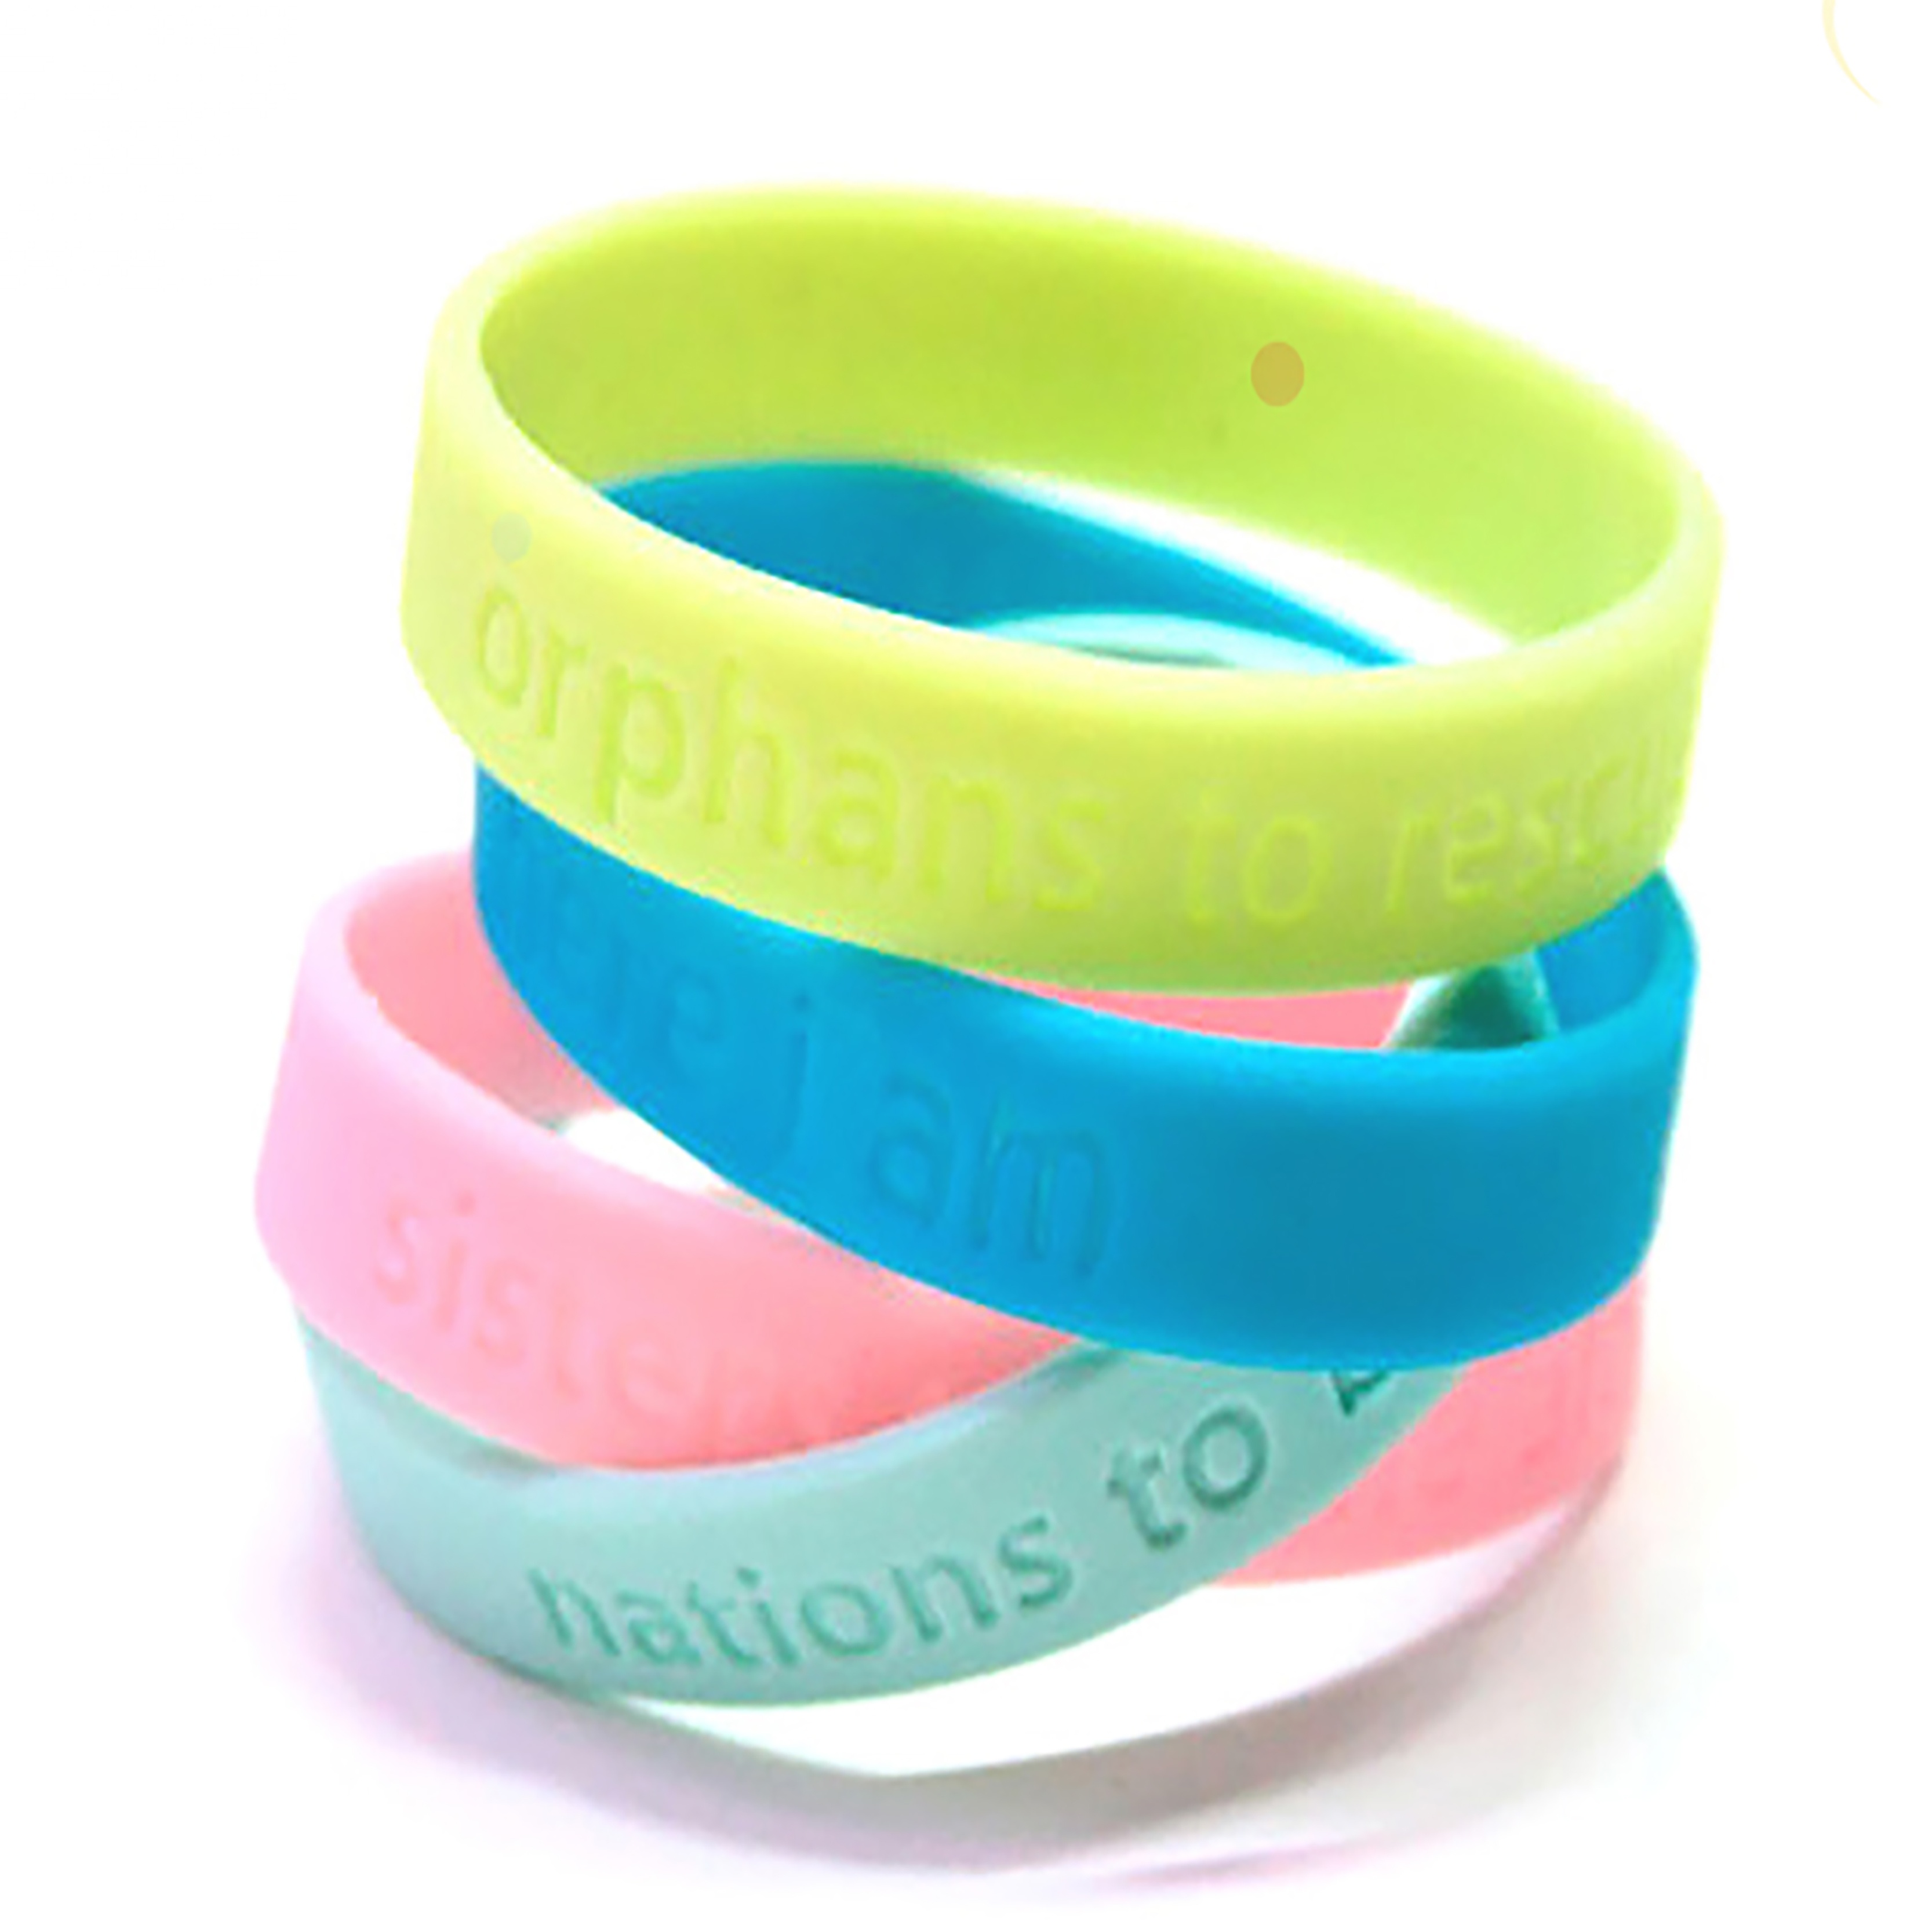 Ngaropea Silicone Wristbands Silicone Gelang Adat Silicone Wristbands pinggel